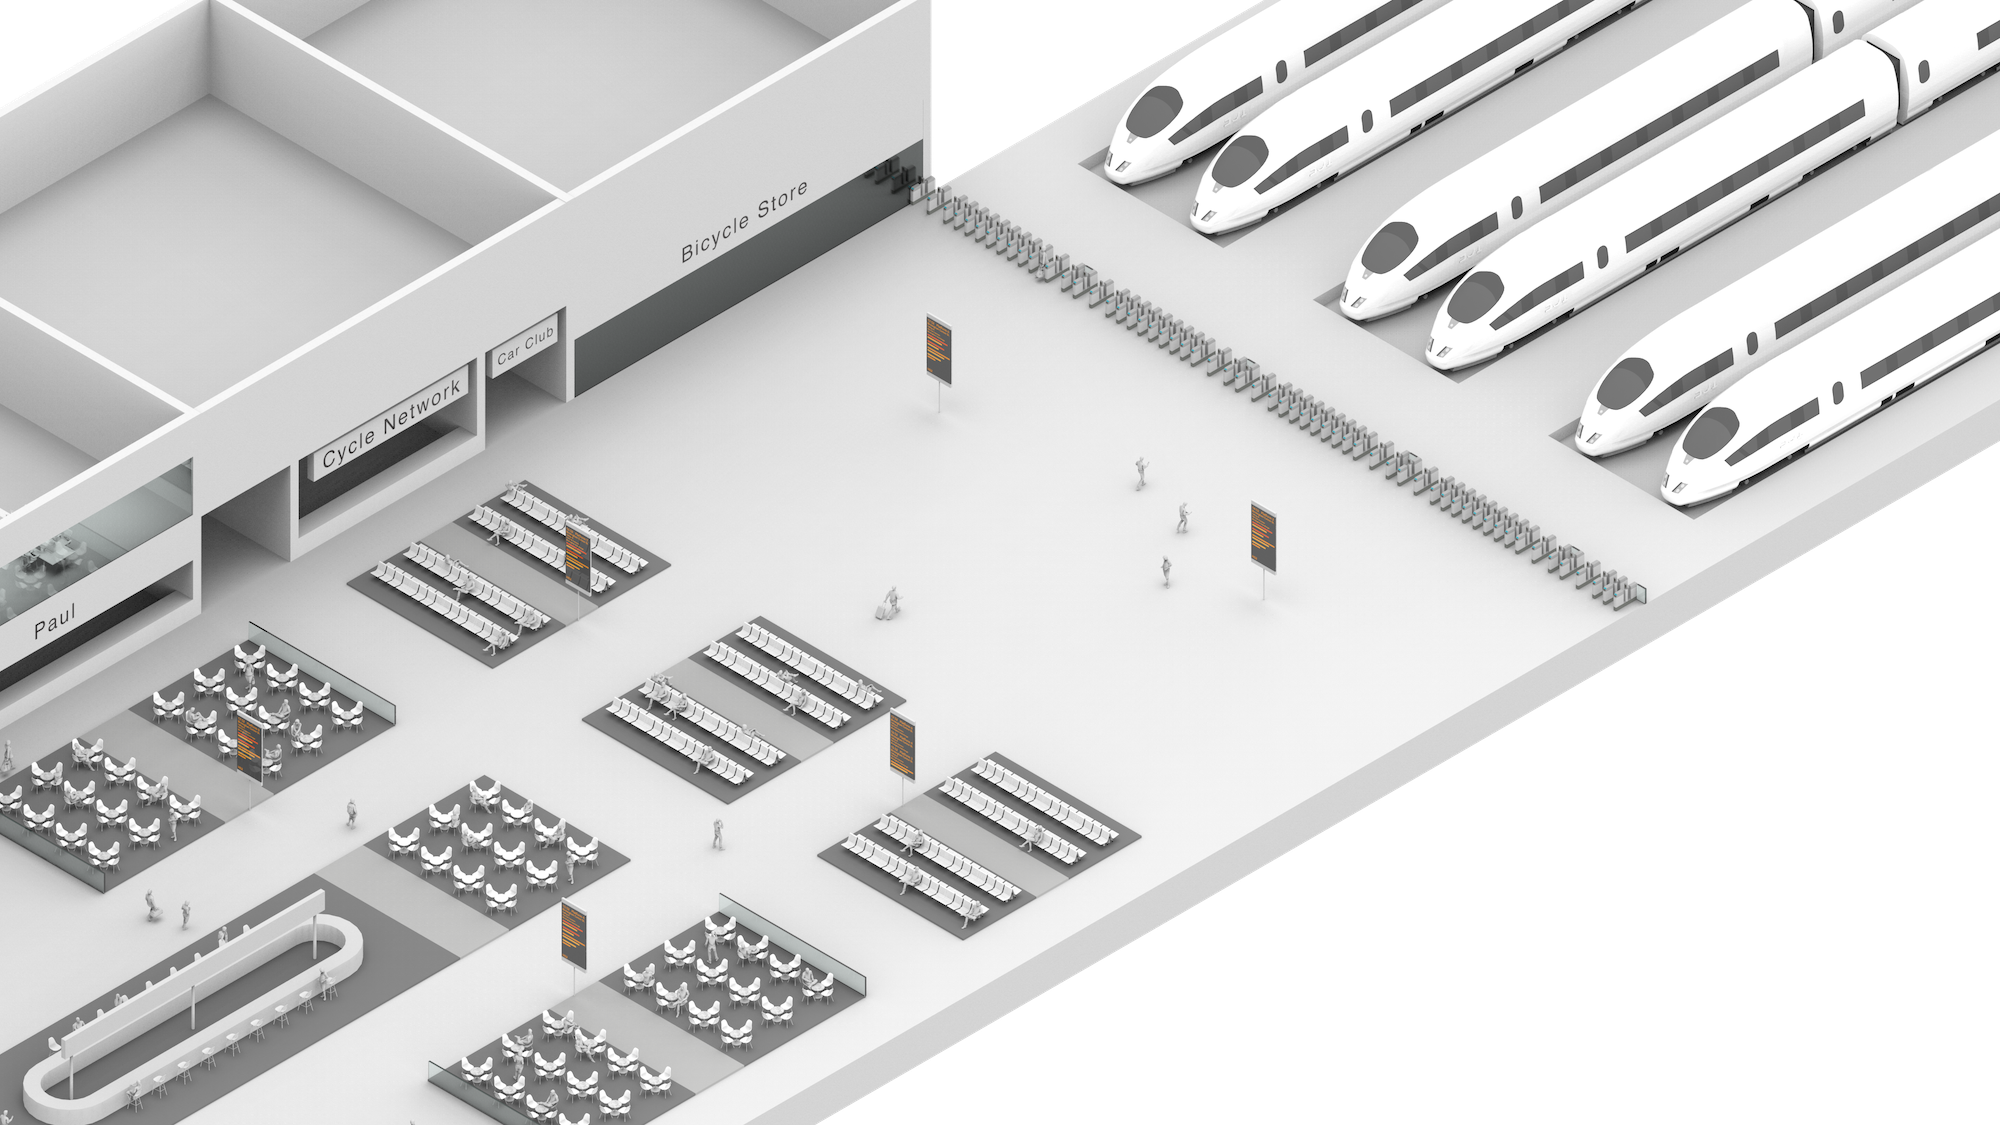 A digital rendering of a train platform from our consultancy work on the HS2 project